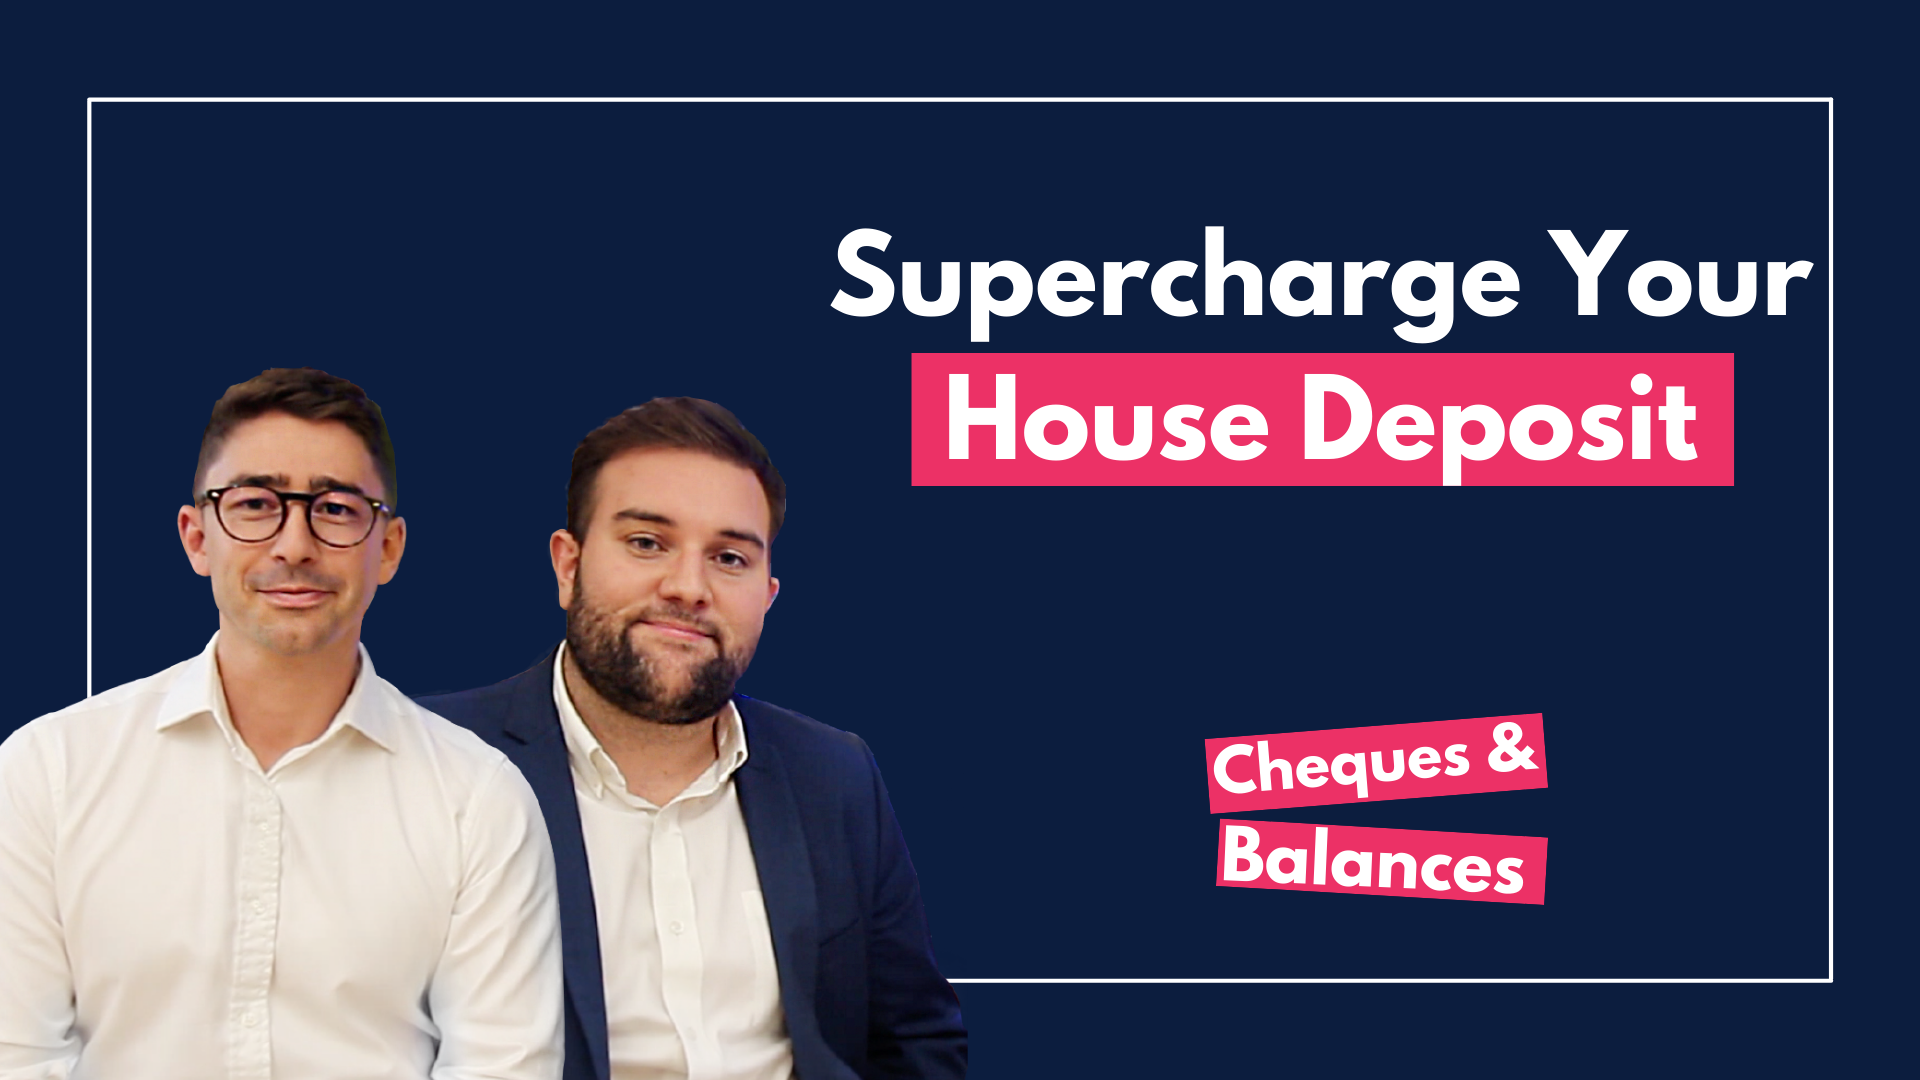 Supercharge Your House Deposit – The Bank Of Mum And Dad